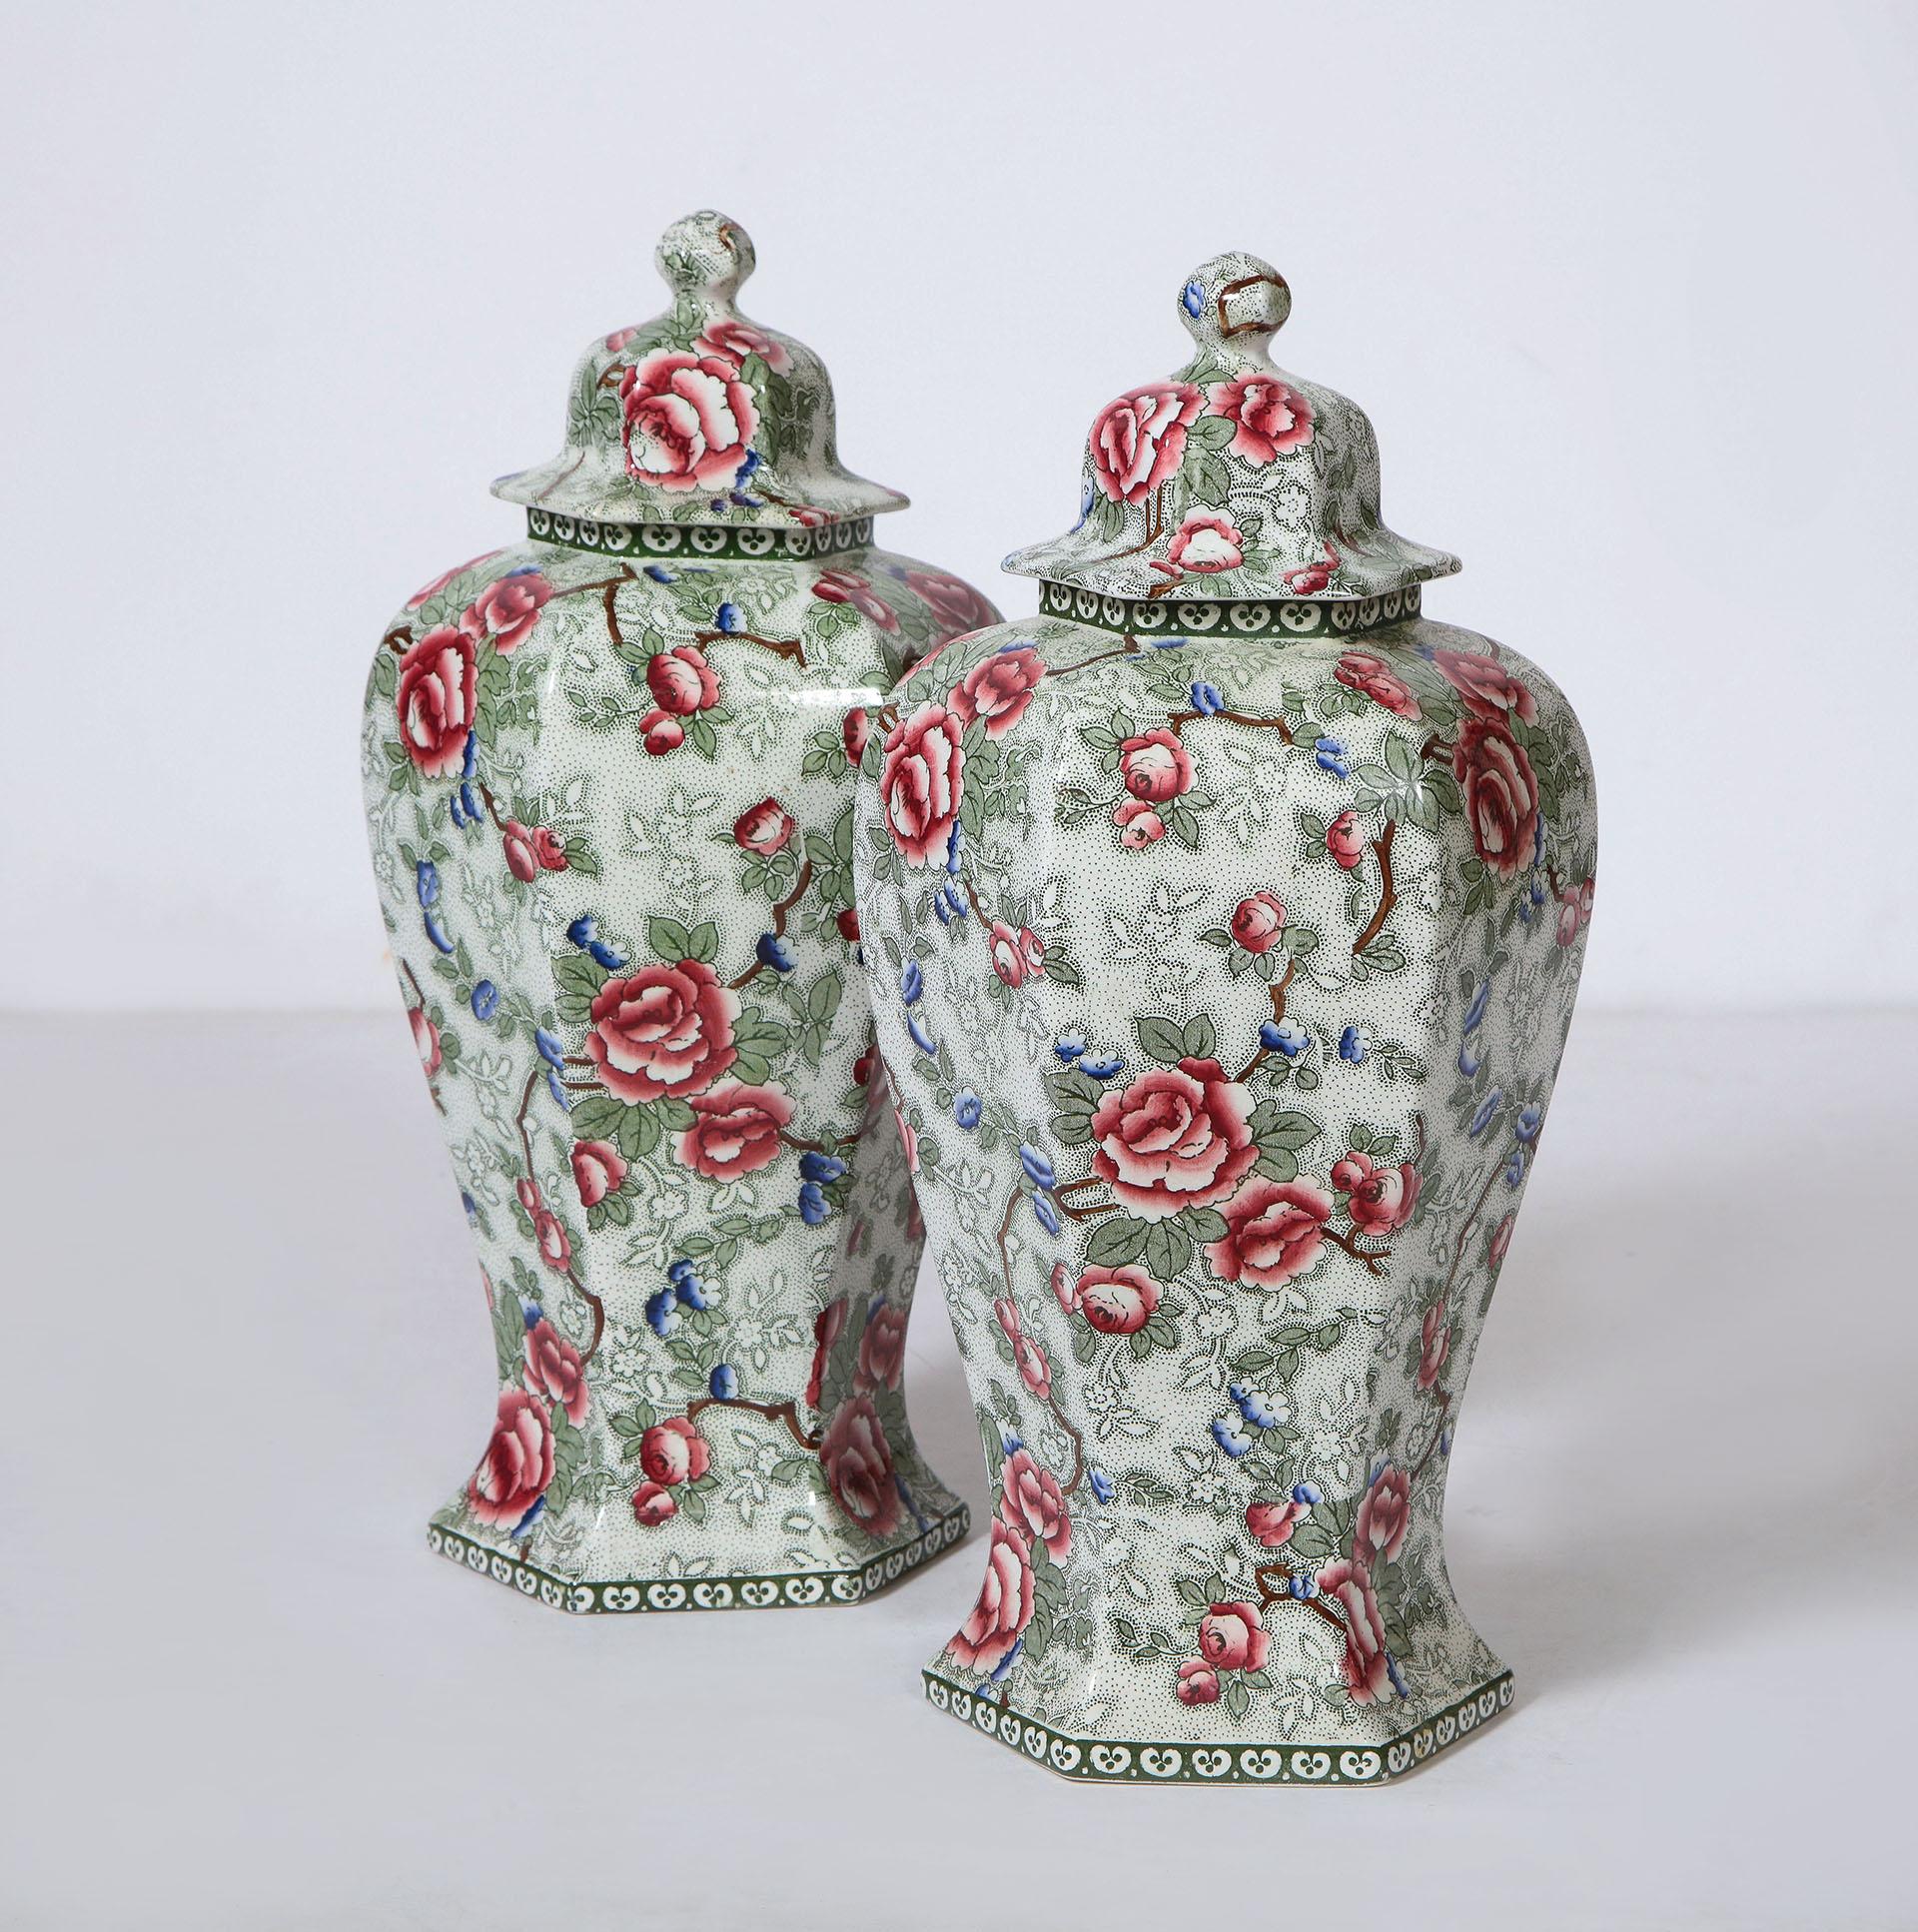 Pair of Covered Hexagonal Urns in a Chintz Pattern

The pair of covered urns all over decorated in a 